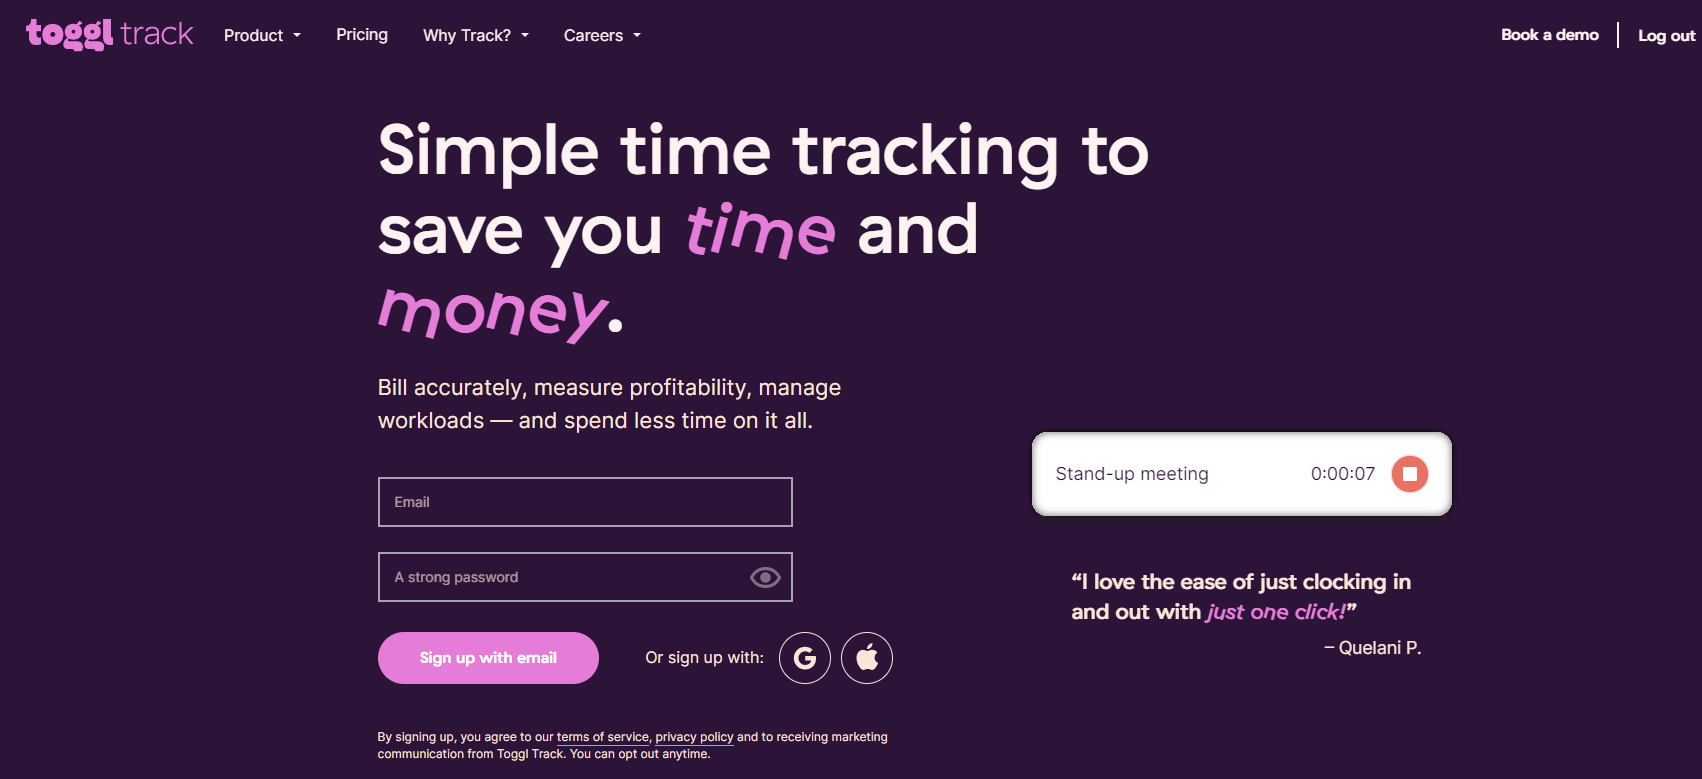 toggl track homepage with singup options